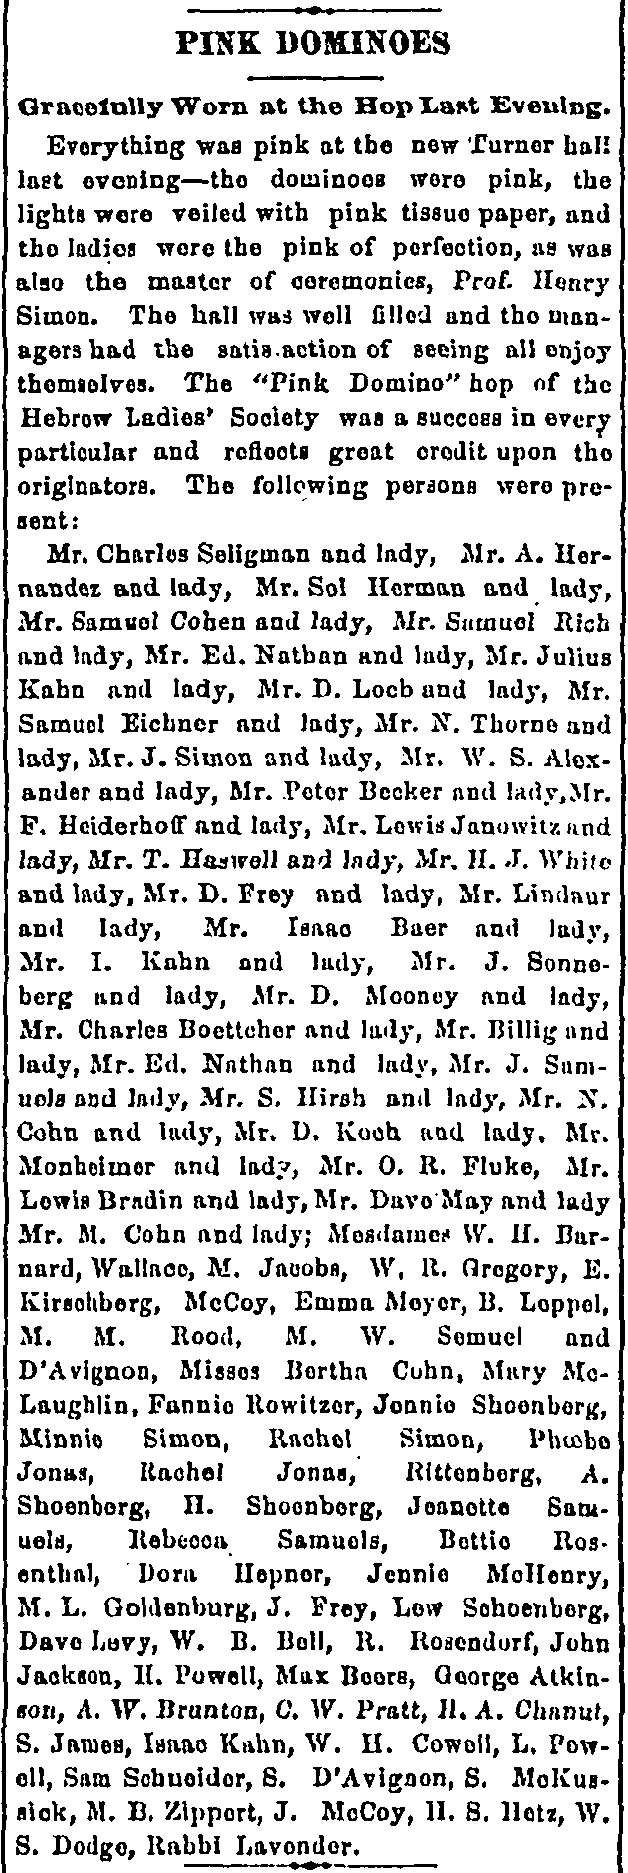 Leadville Daily Herald. Thursday, March 16, 1881.